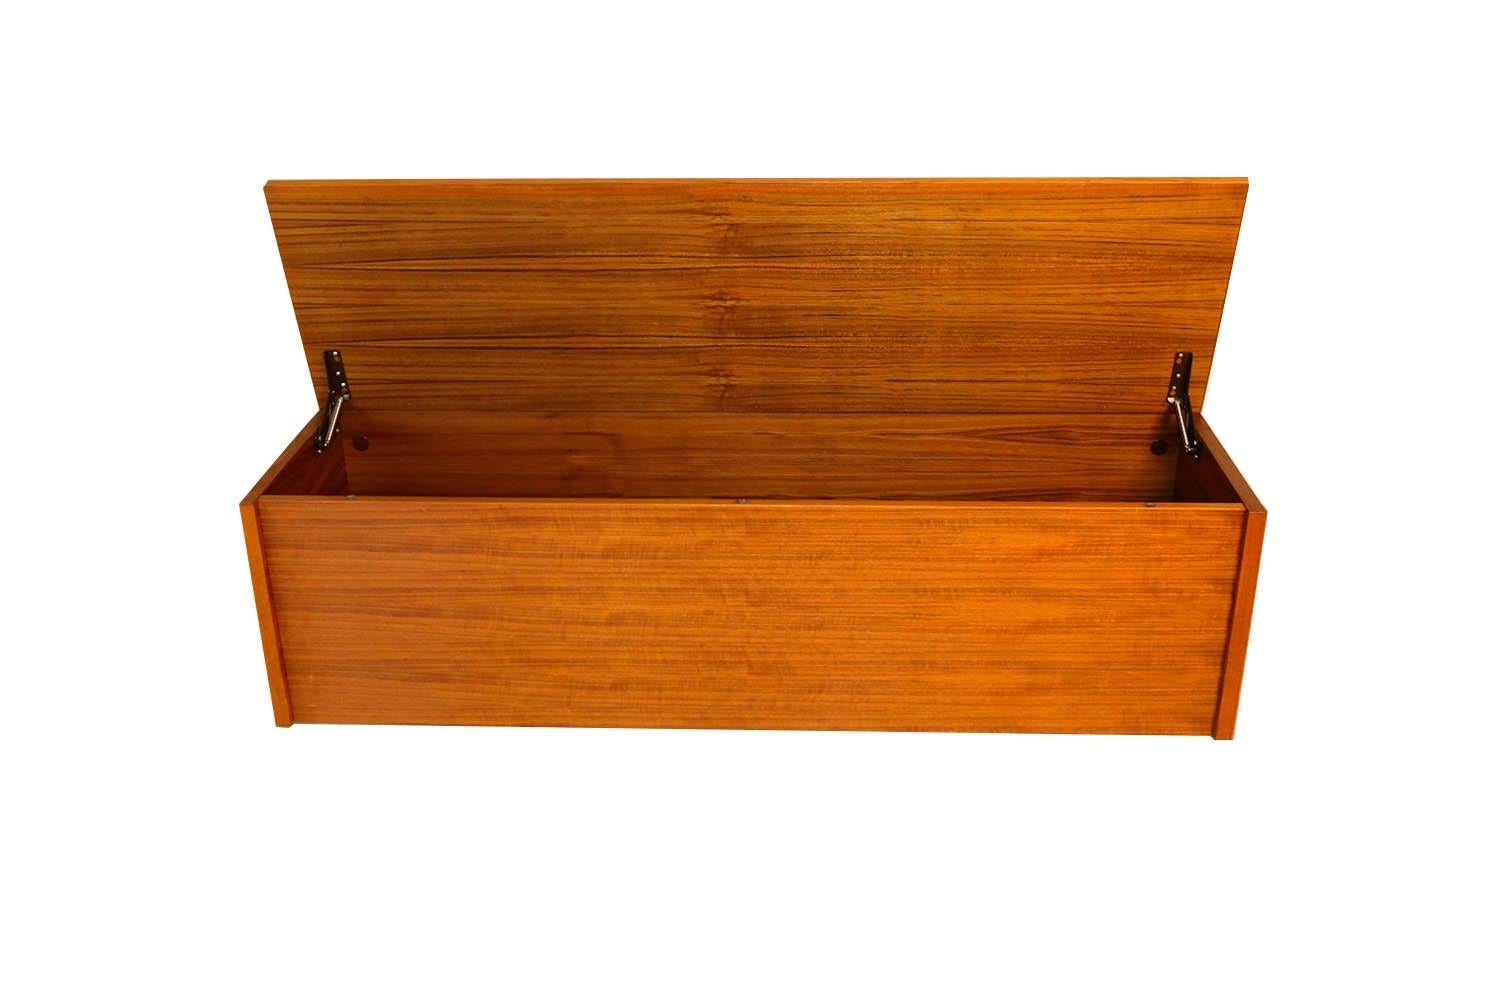 A beautiful Danish modern mid century teak blanket storage/chest, made in Denmark. This large vintage Danish teak blanket chest/storage trunk features spacious storage with divided interior. Precisely crafted in exceptional teak wood grain, with a